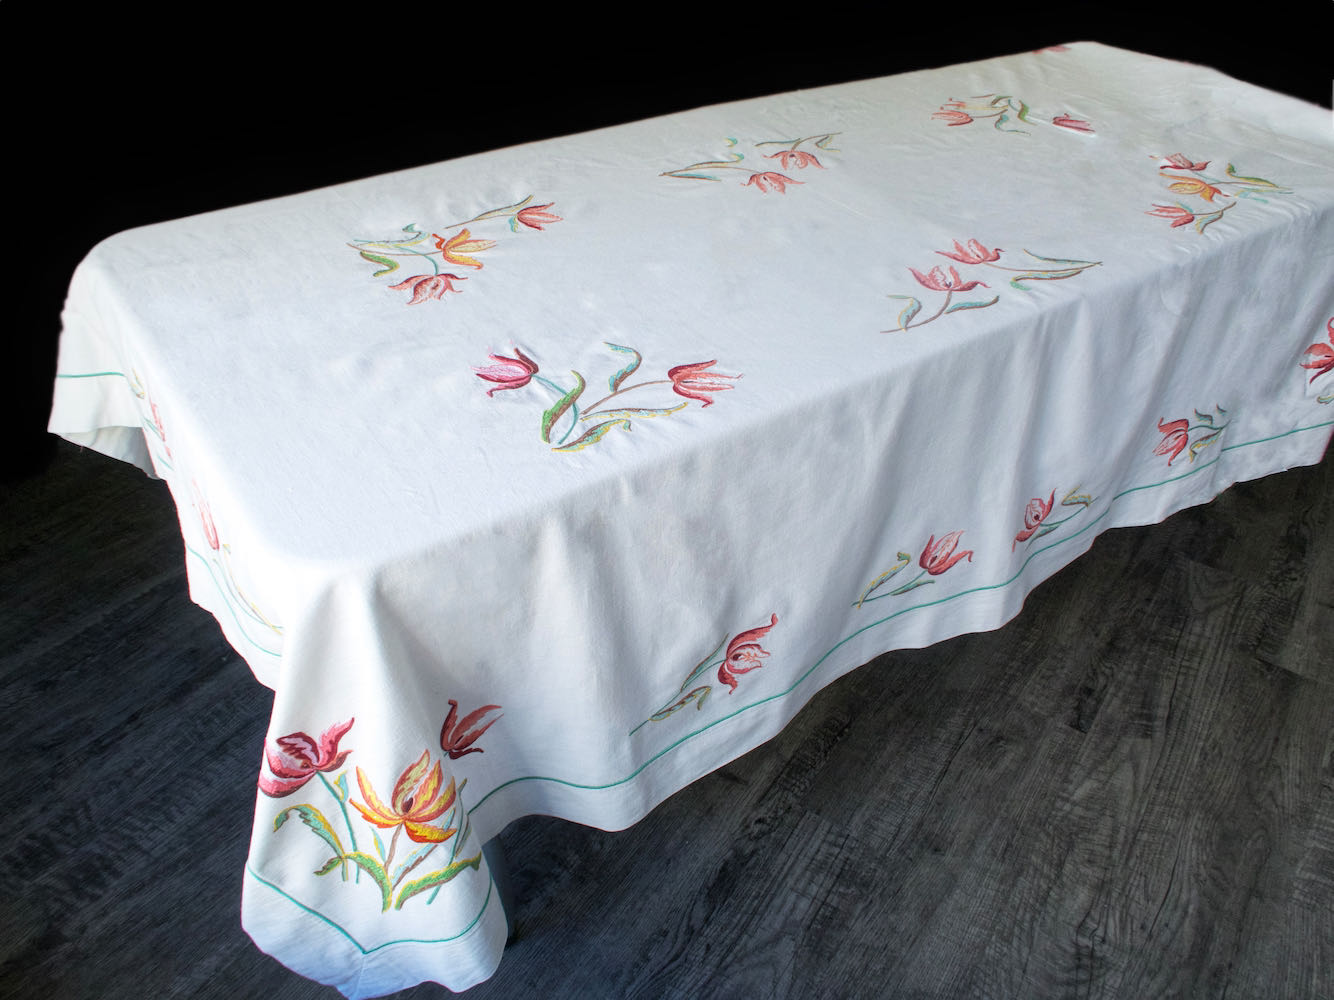 Vibrant Flowers Vintage Linen Embroidered Tablecloth 60x84"